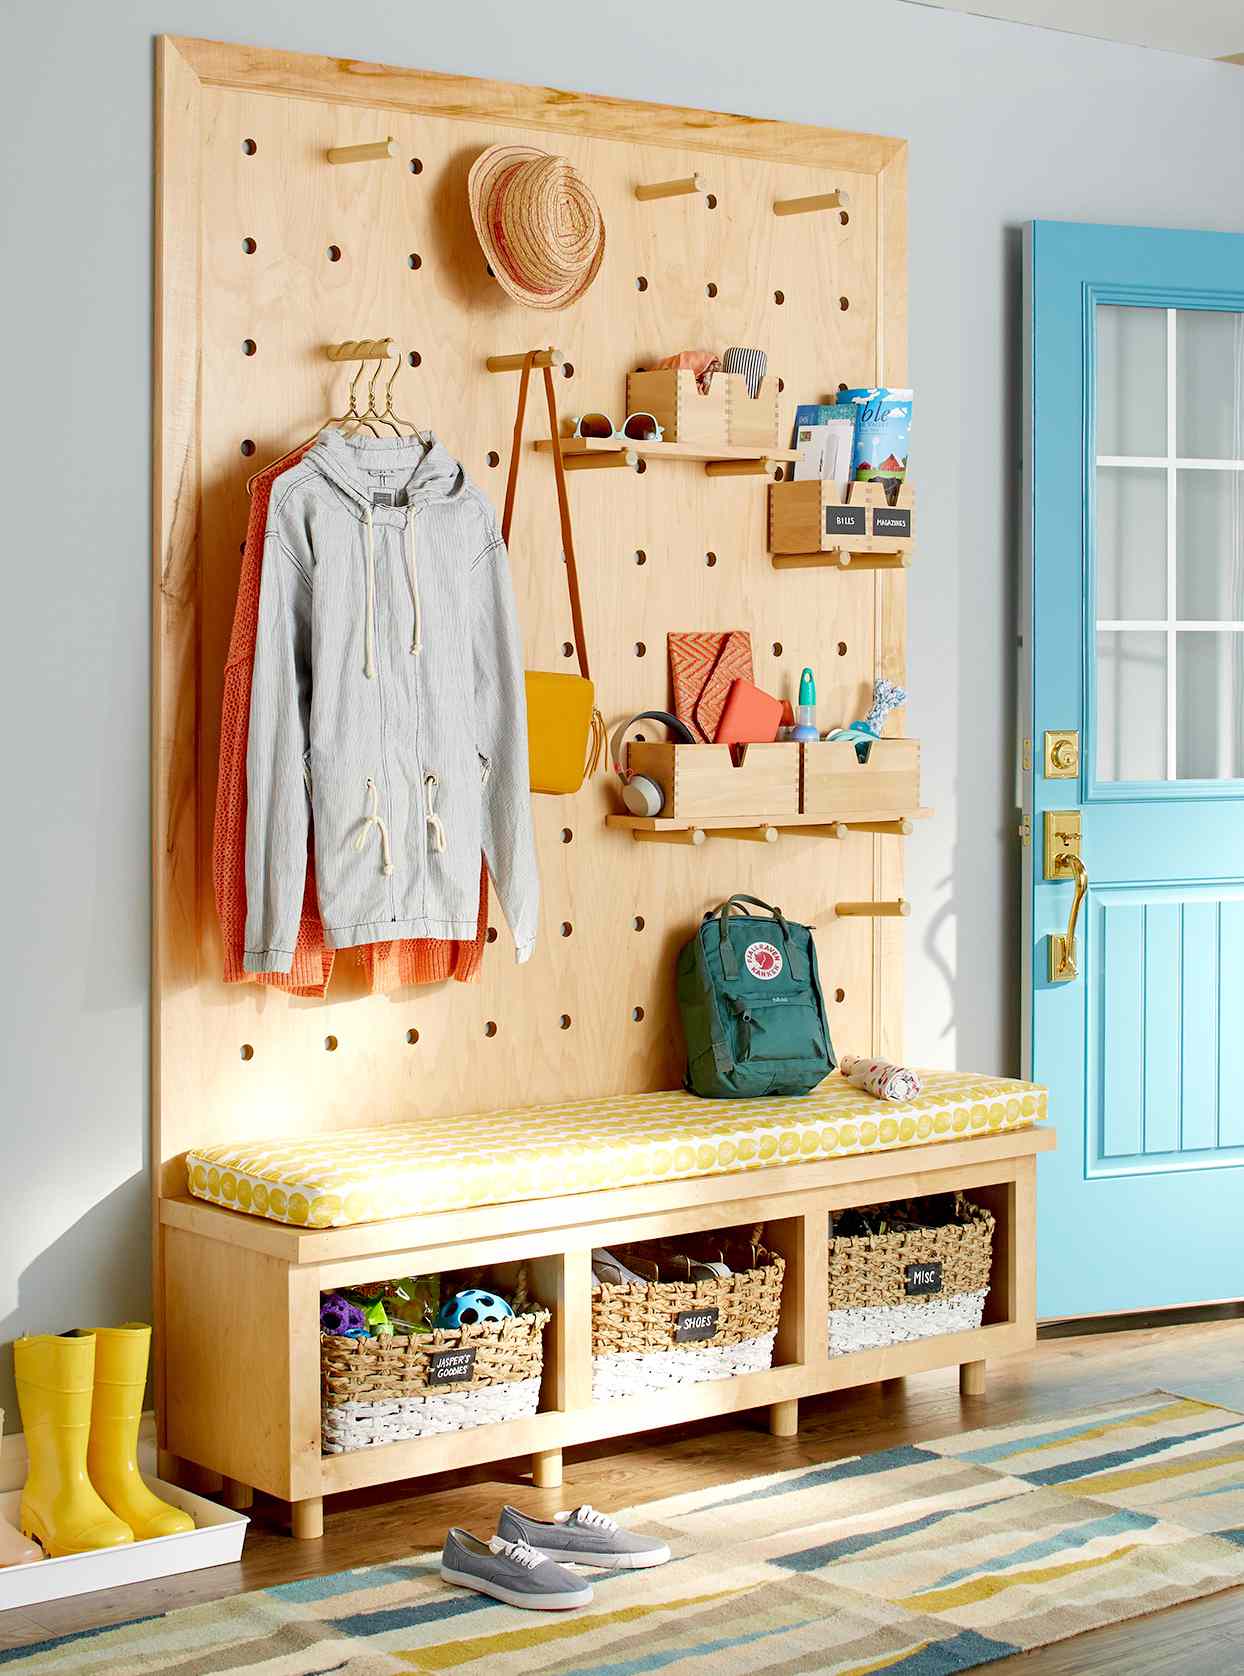 Pegboard holding items at front door